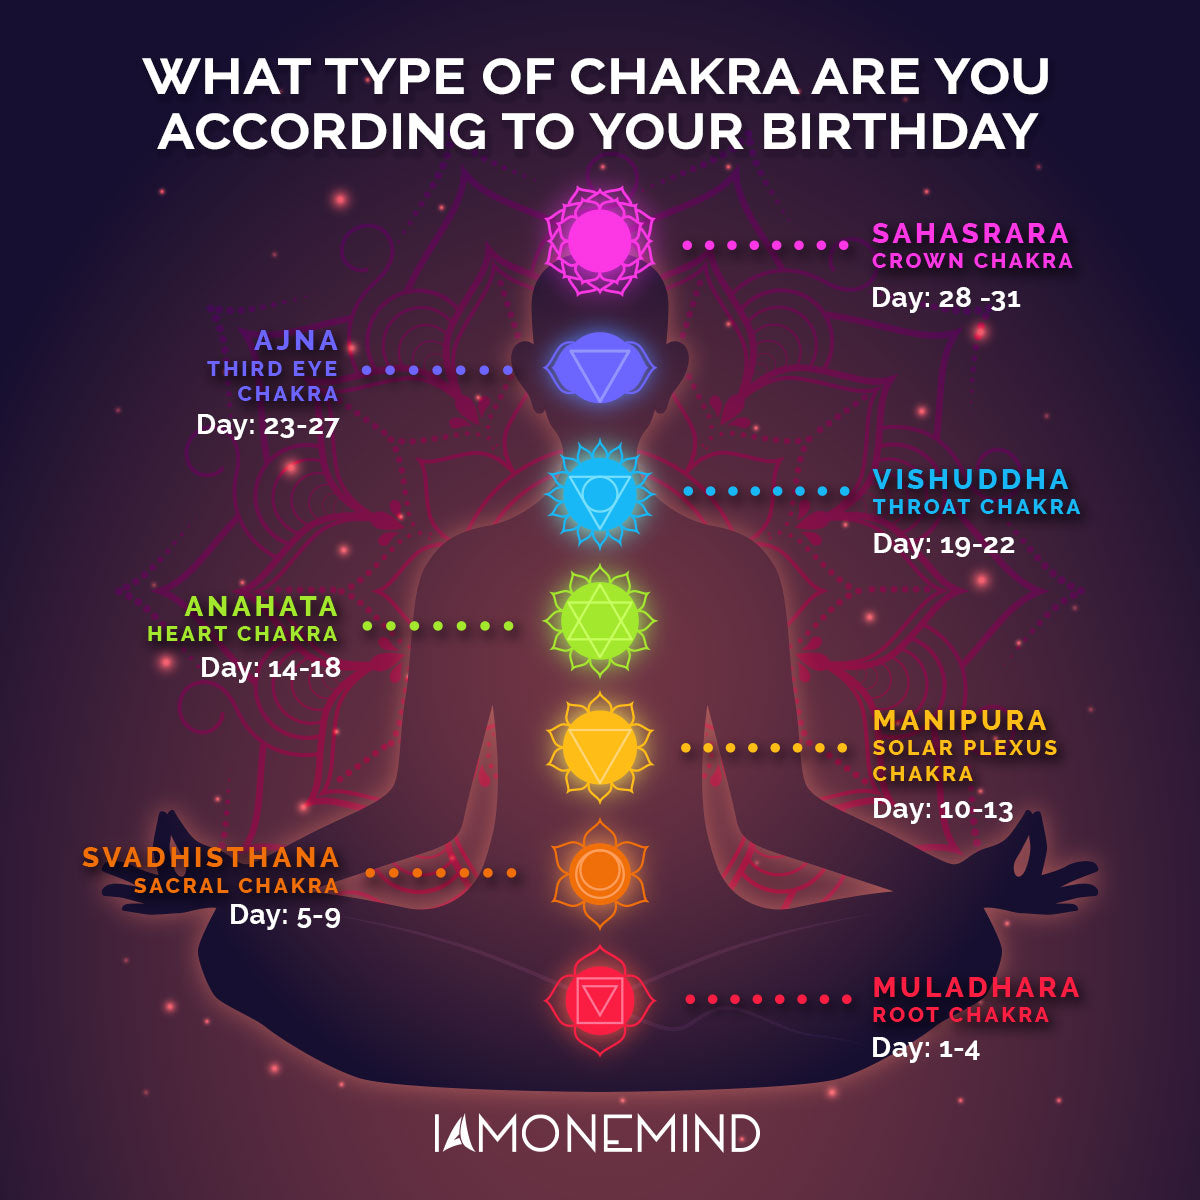 The 7 Chakras: Everything You Need to Know - The Inspo Spot